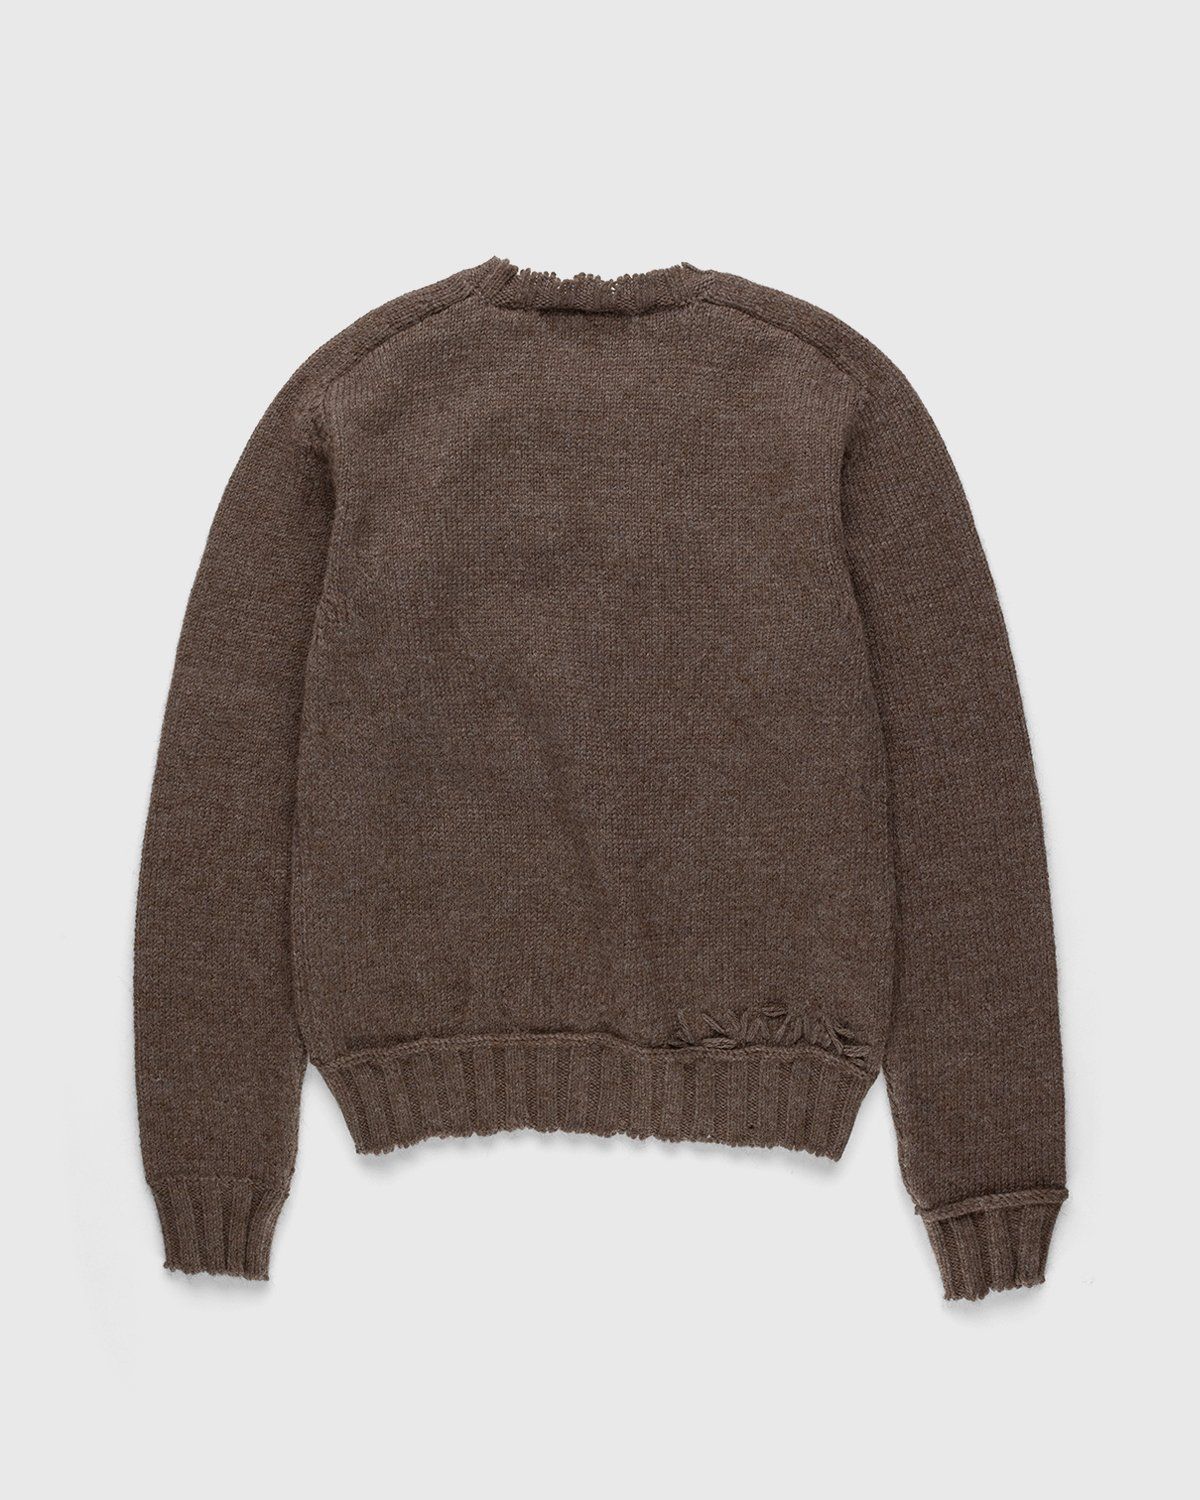 Phipps – Flower Knit Brown - Knitwear - Brown - Image 2